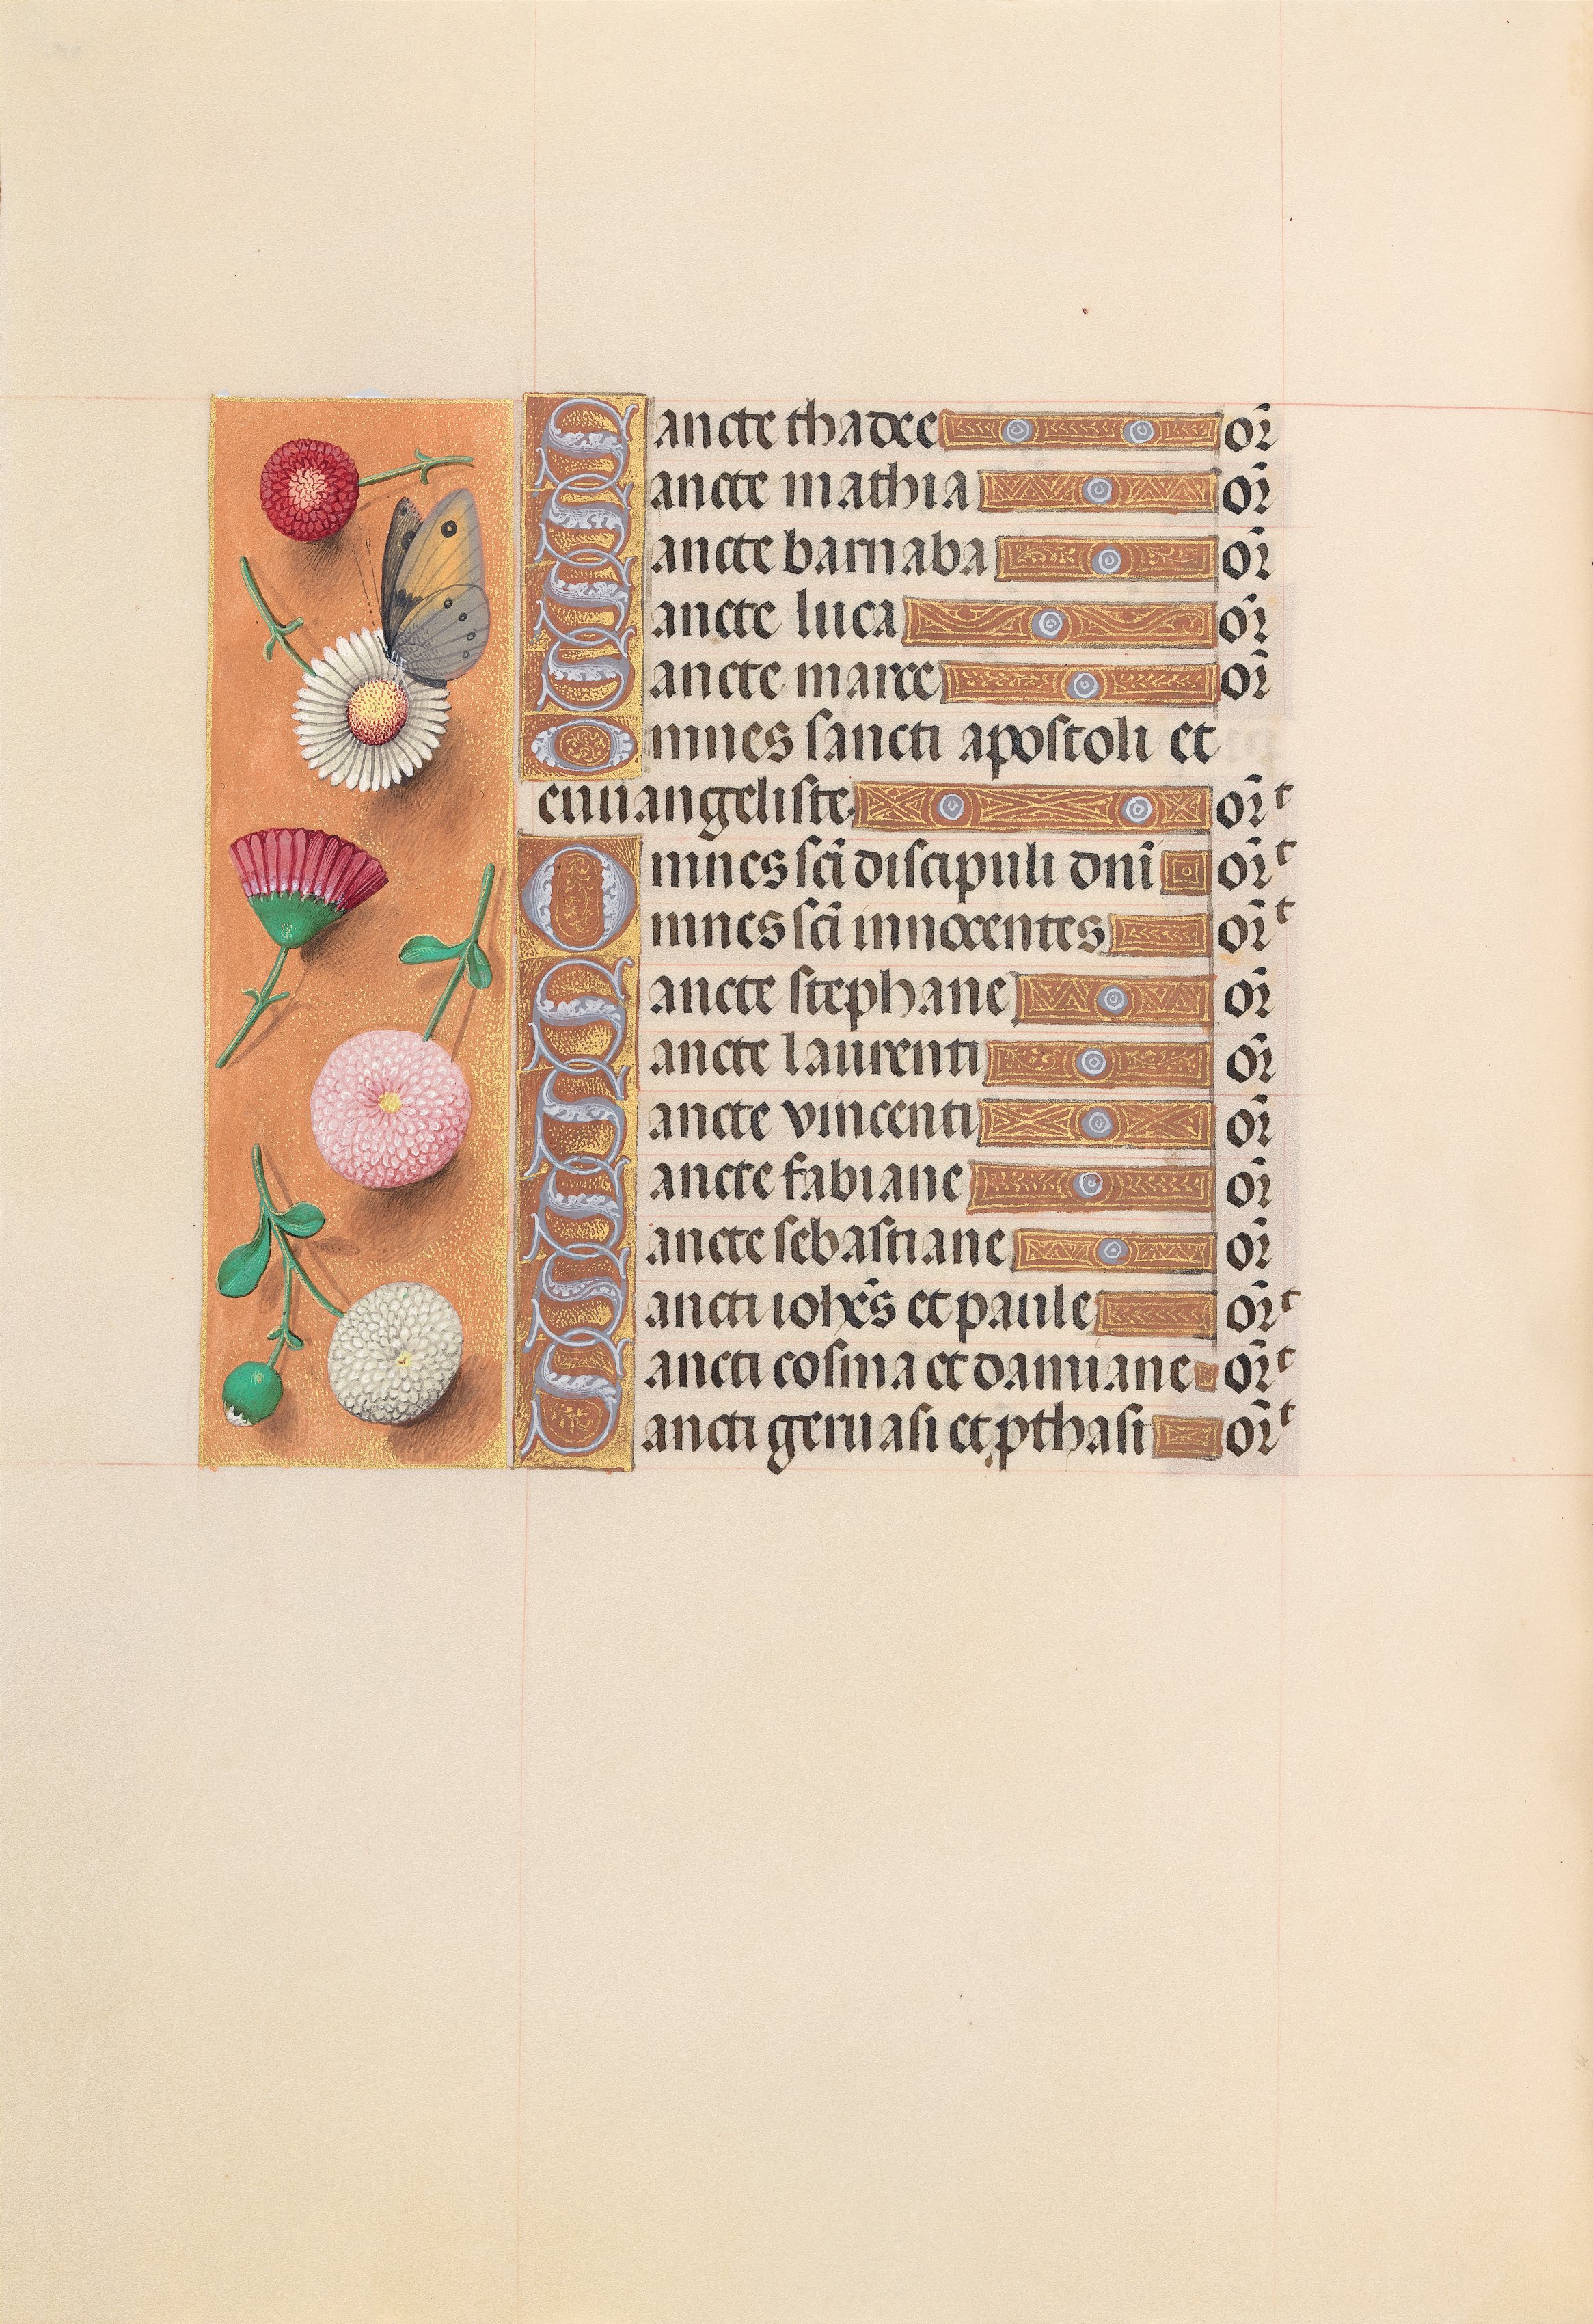 Hours of Queen Isabella the Catholic, Queen of Spain:  Fol. 211v